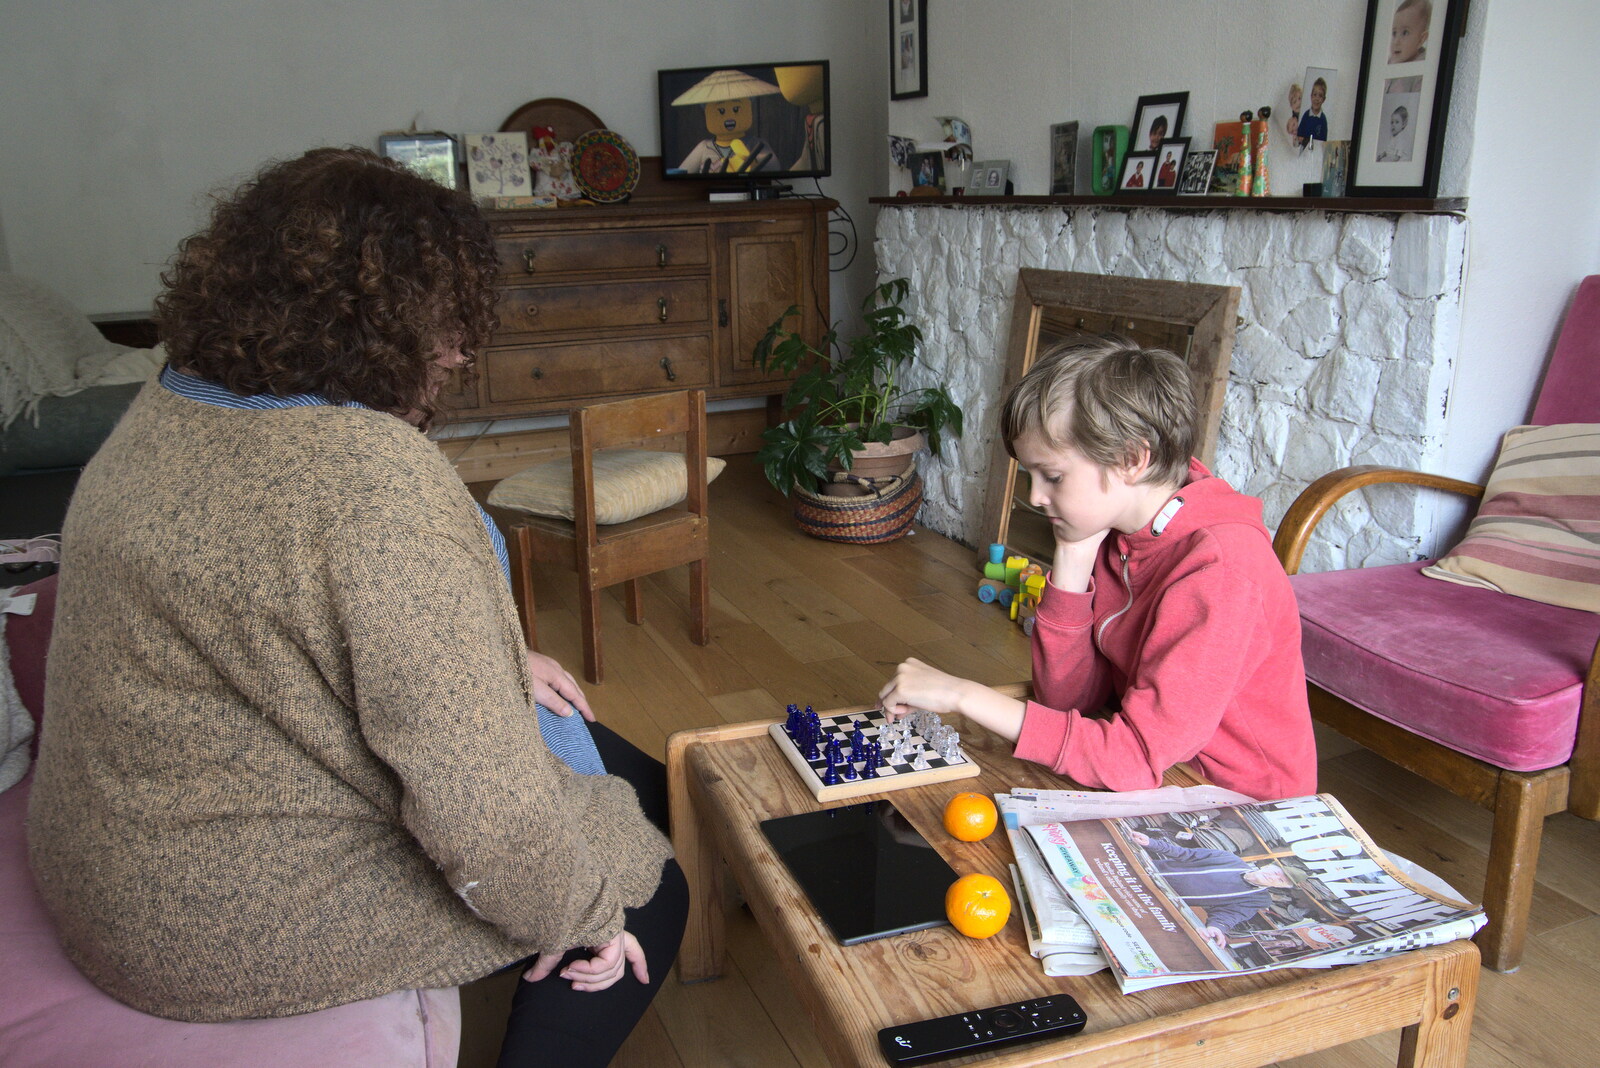 Blackrock North and South, Louth and County Dublin, Ireland - 23rd April 2022: Louise and Harry play chess